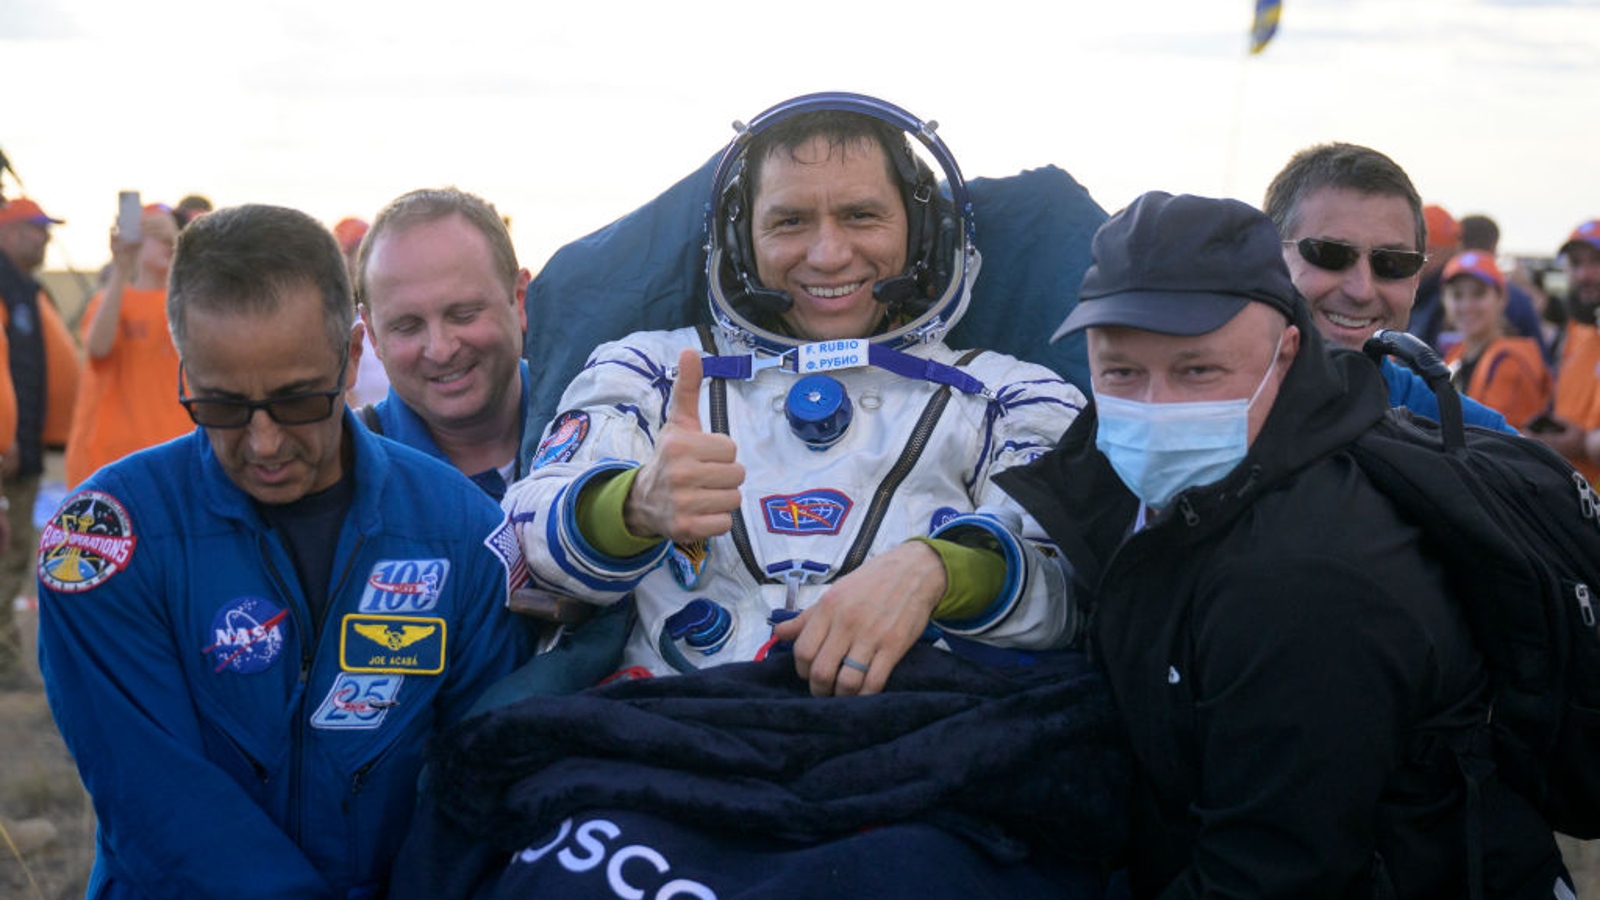 Record-breaking astronaut Frank Rubio finally returns to Earth after accidentally spending 371 days in space